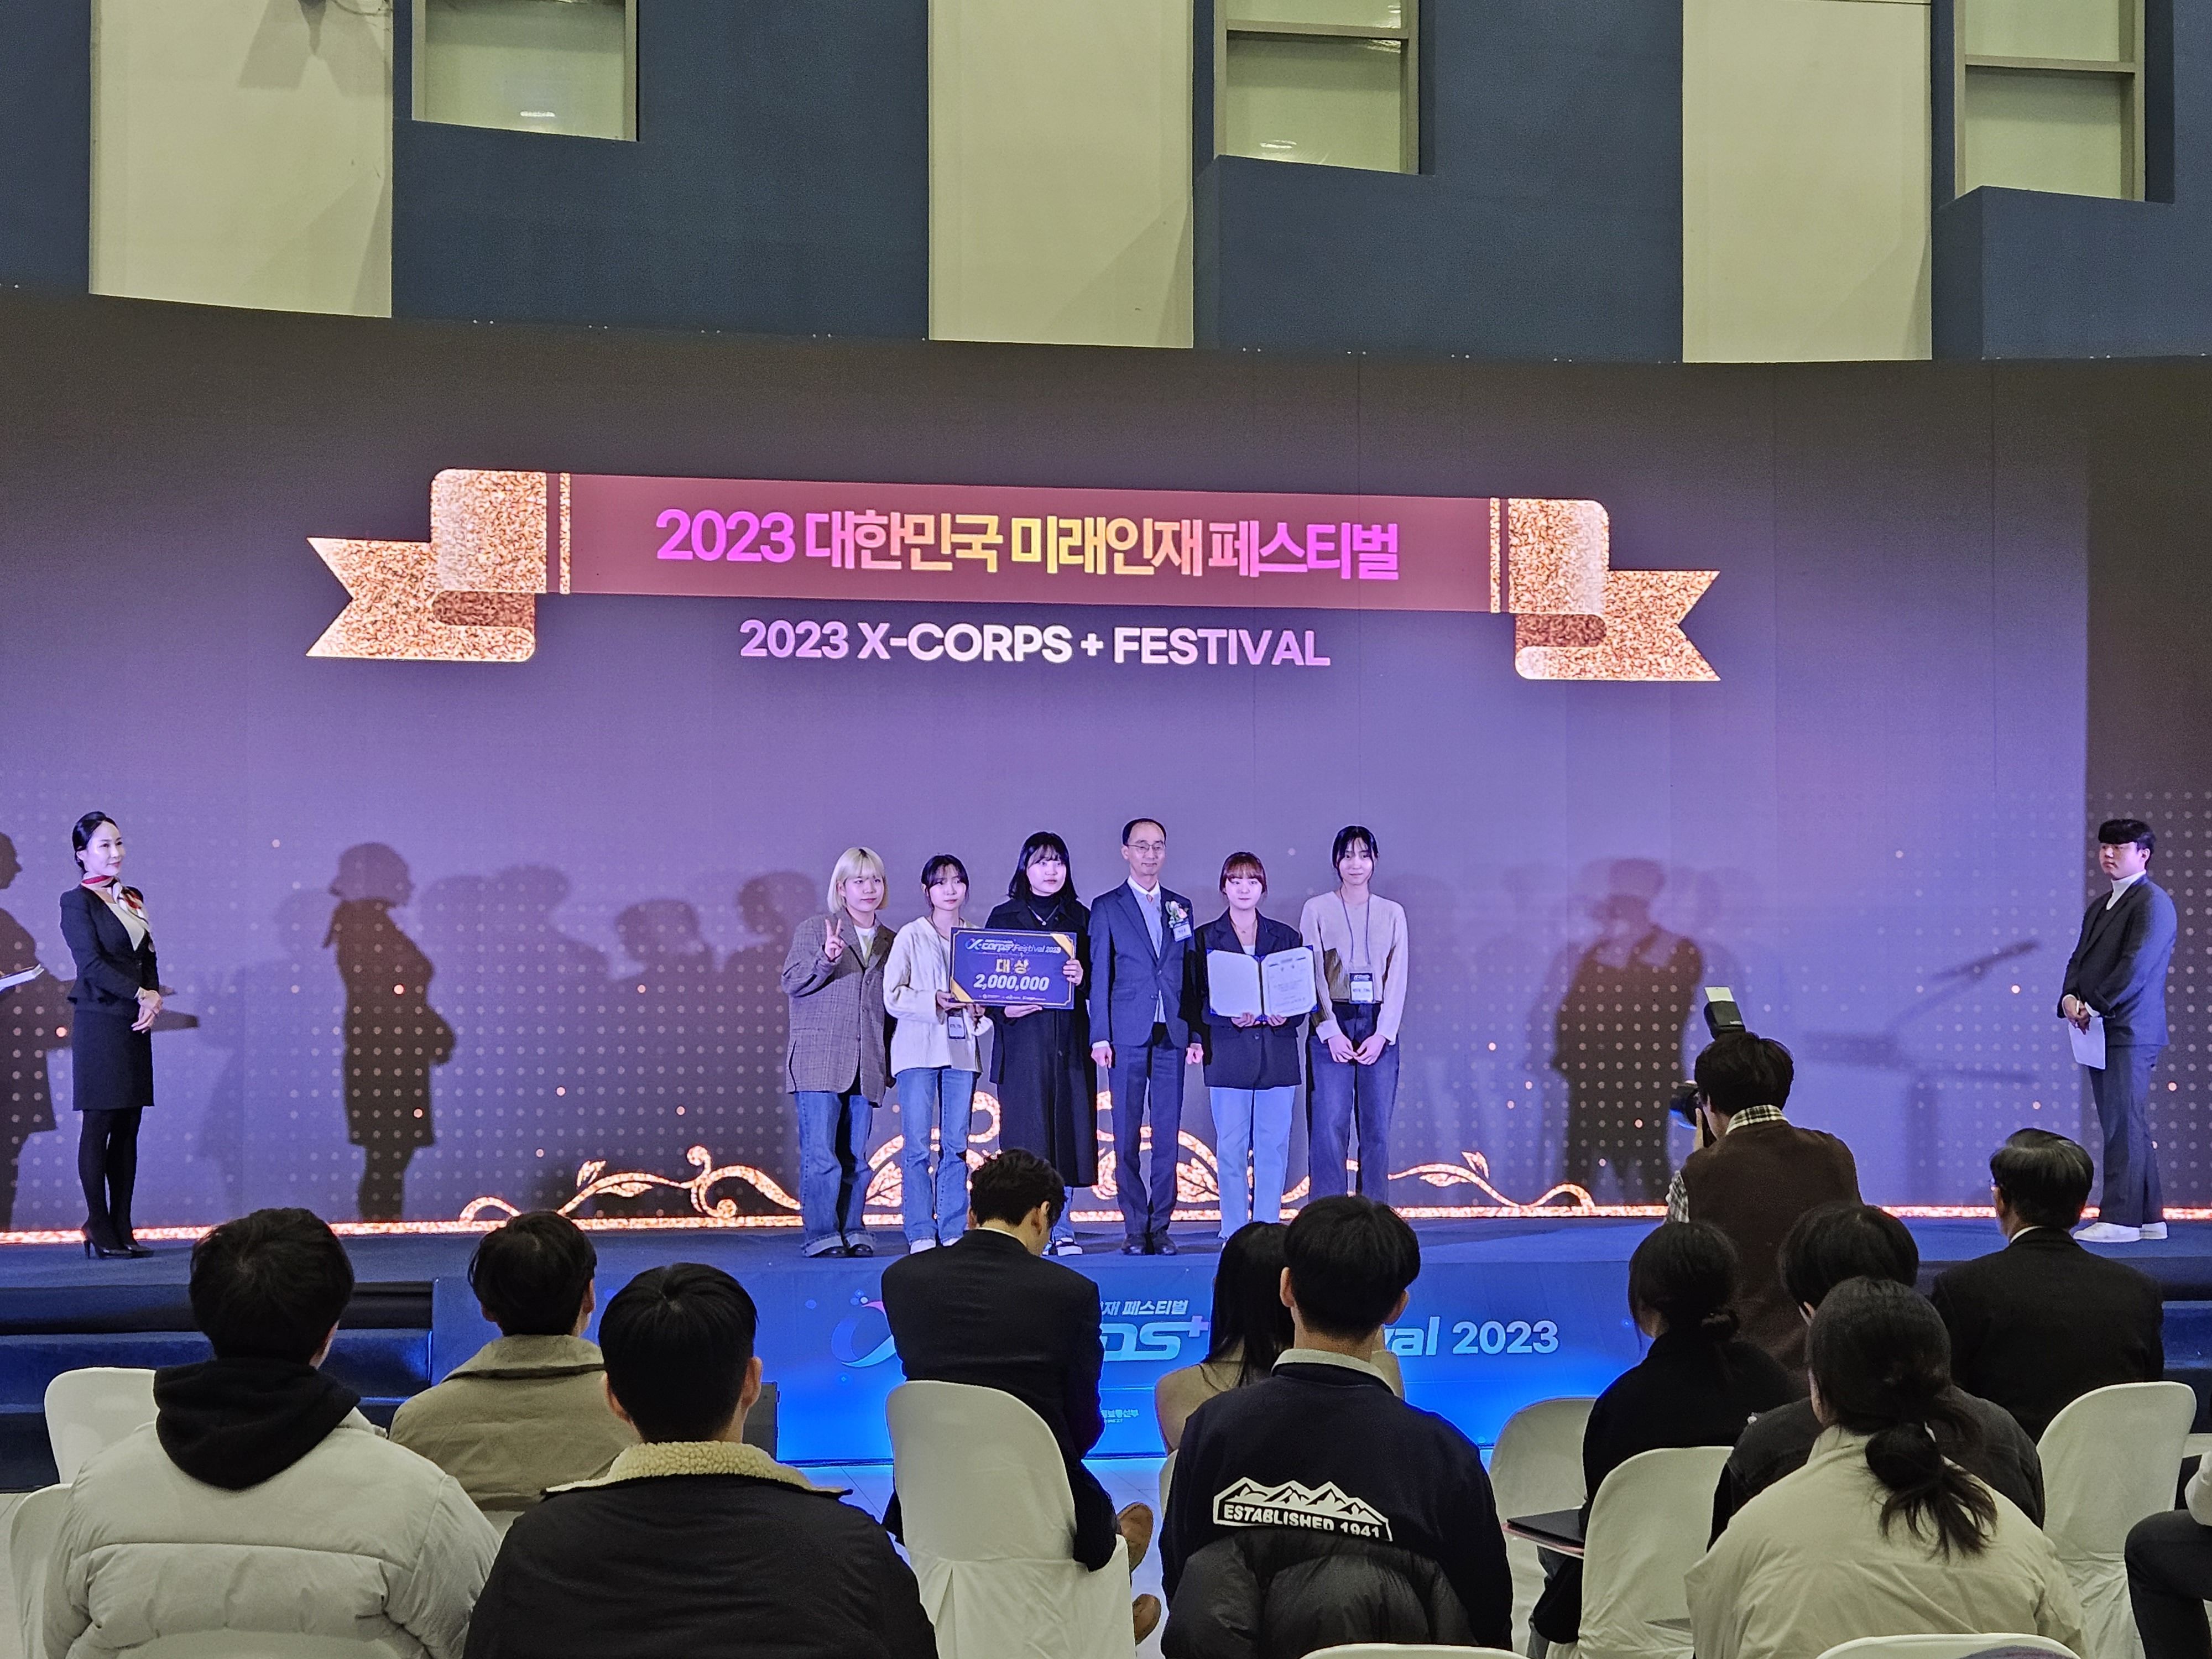 Team BTS-TBL awareded the Minister of Science and ICT Award for their groundbreaking work on glaucoma diagnosis at the X-CORPS+Festival, held in Daejeon. l Image Credit: BTS IFRP Team